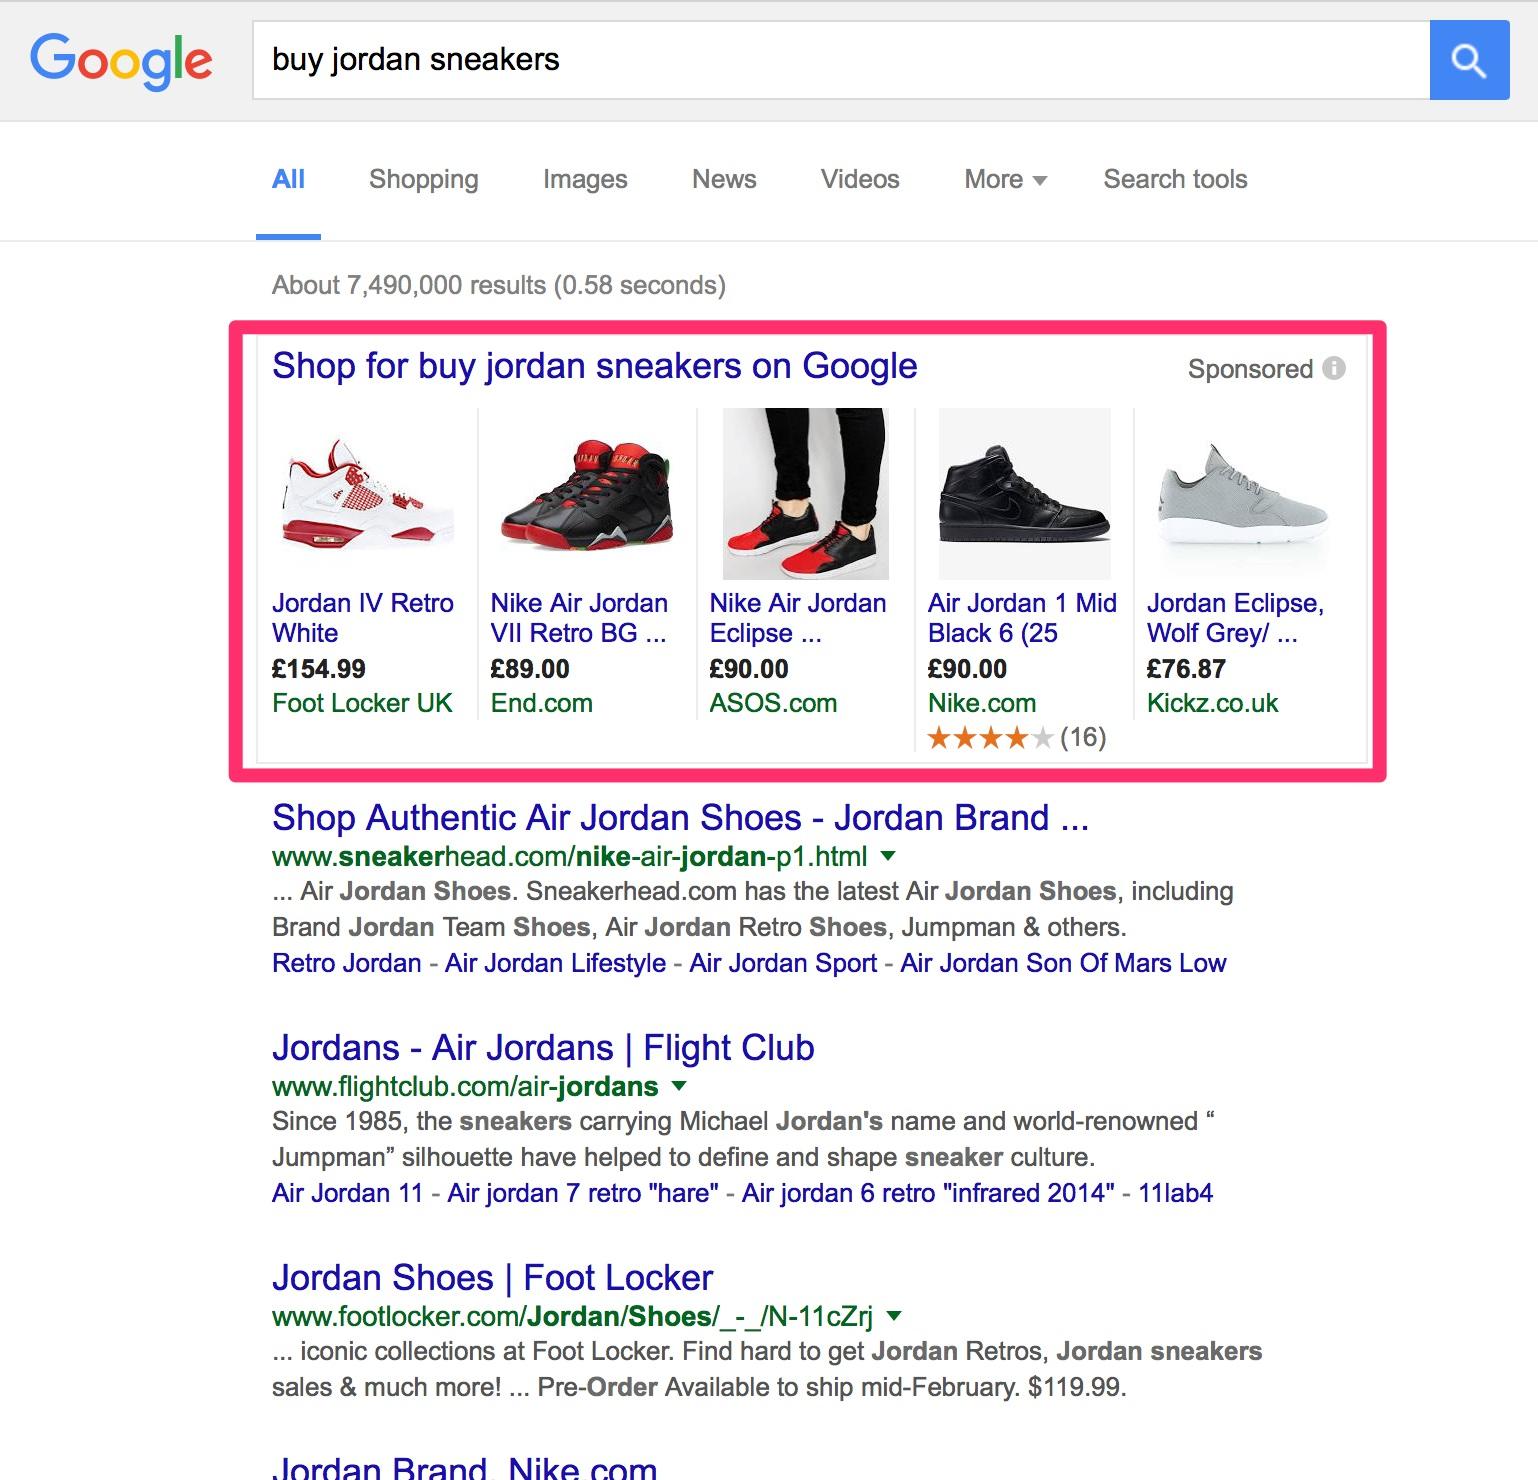 Screenshot of Google shopping ad appearing at the top of a SERP.